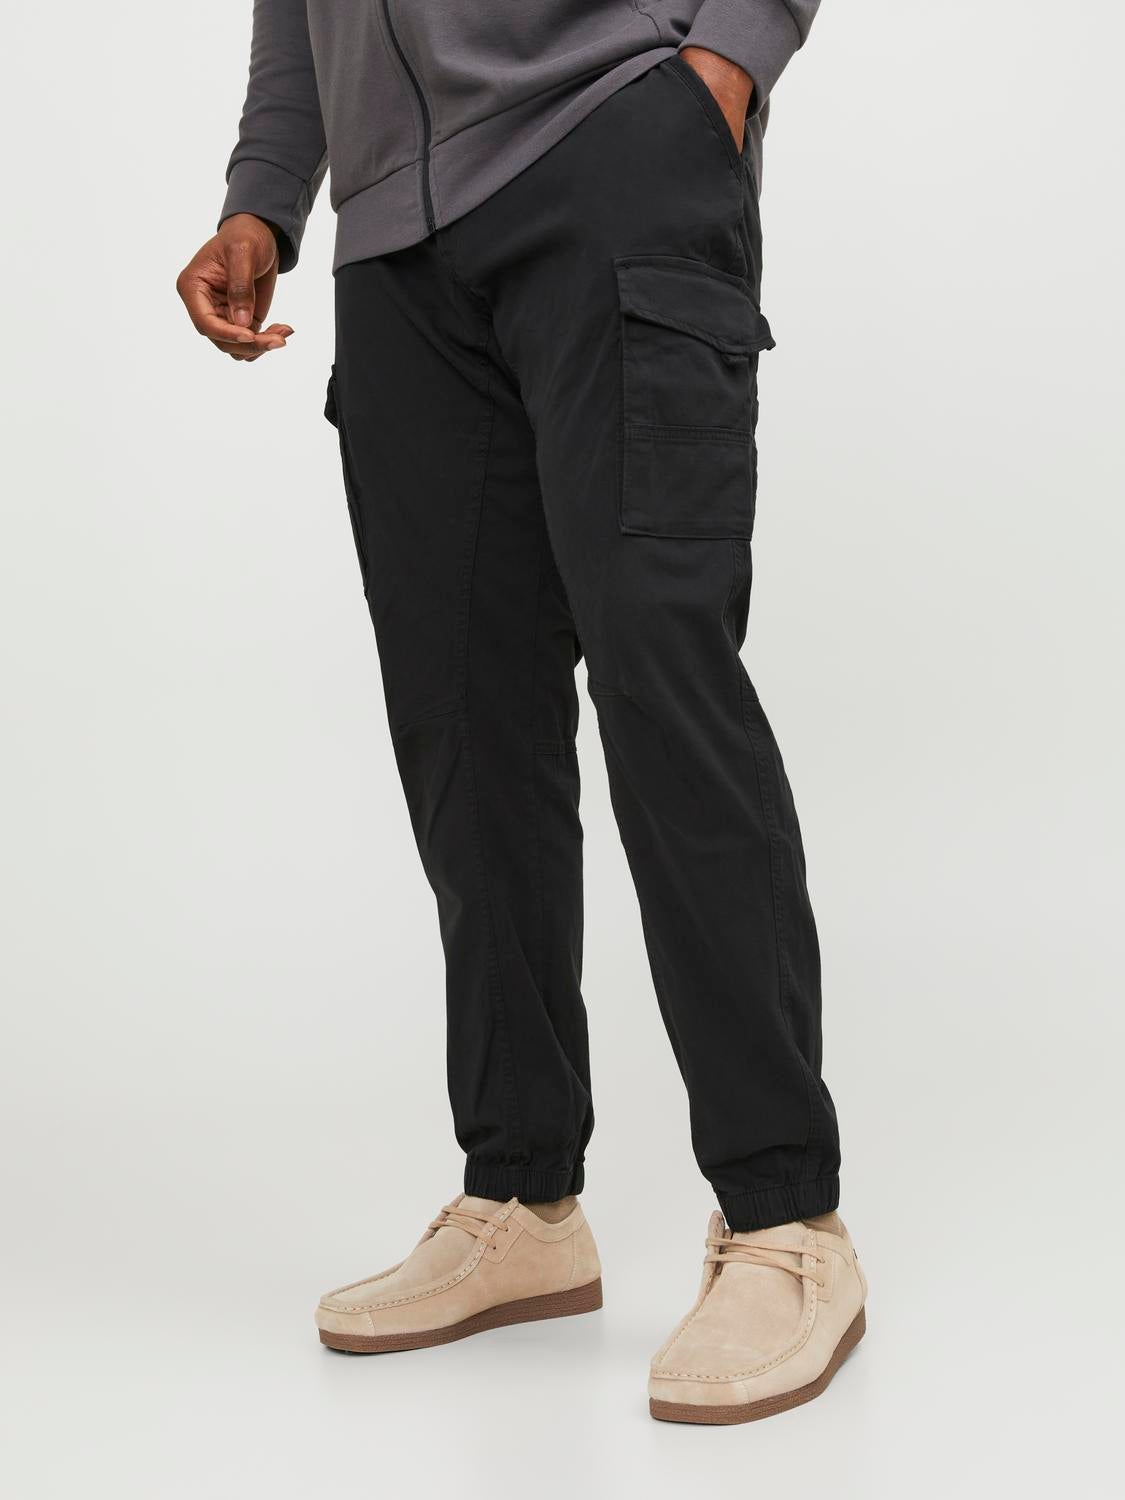 Buy Olive Green Trousers & Pants for Men by G STAR RAW Online | Ajio.com